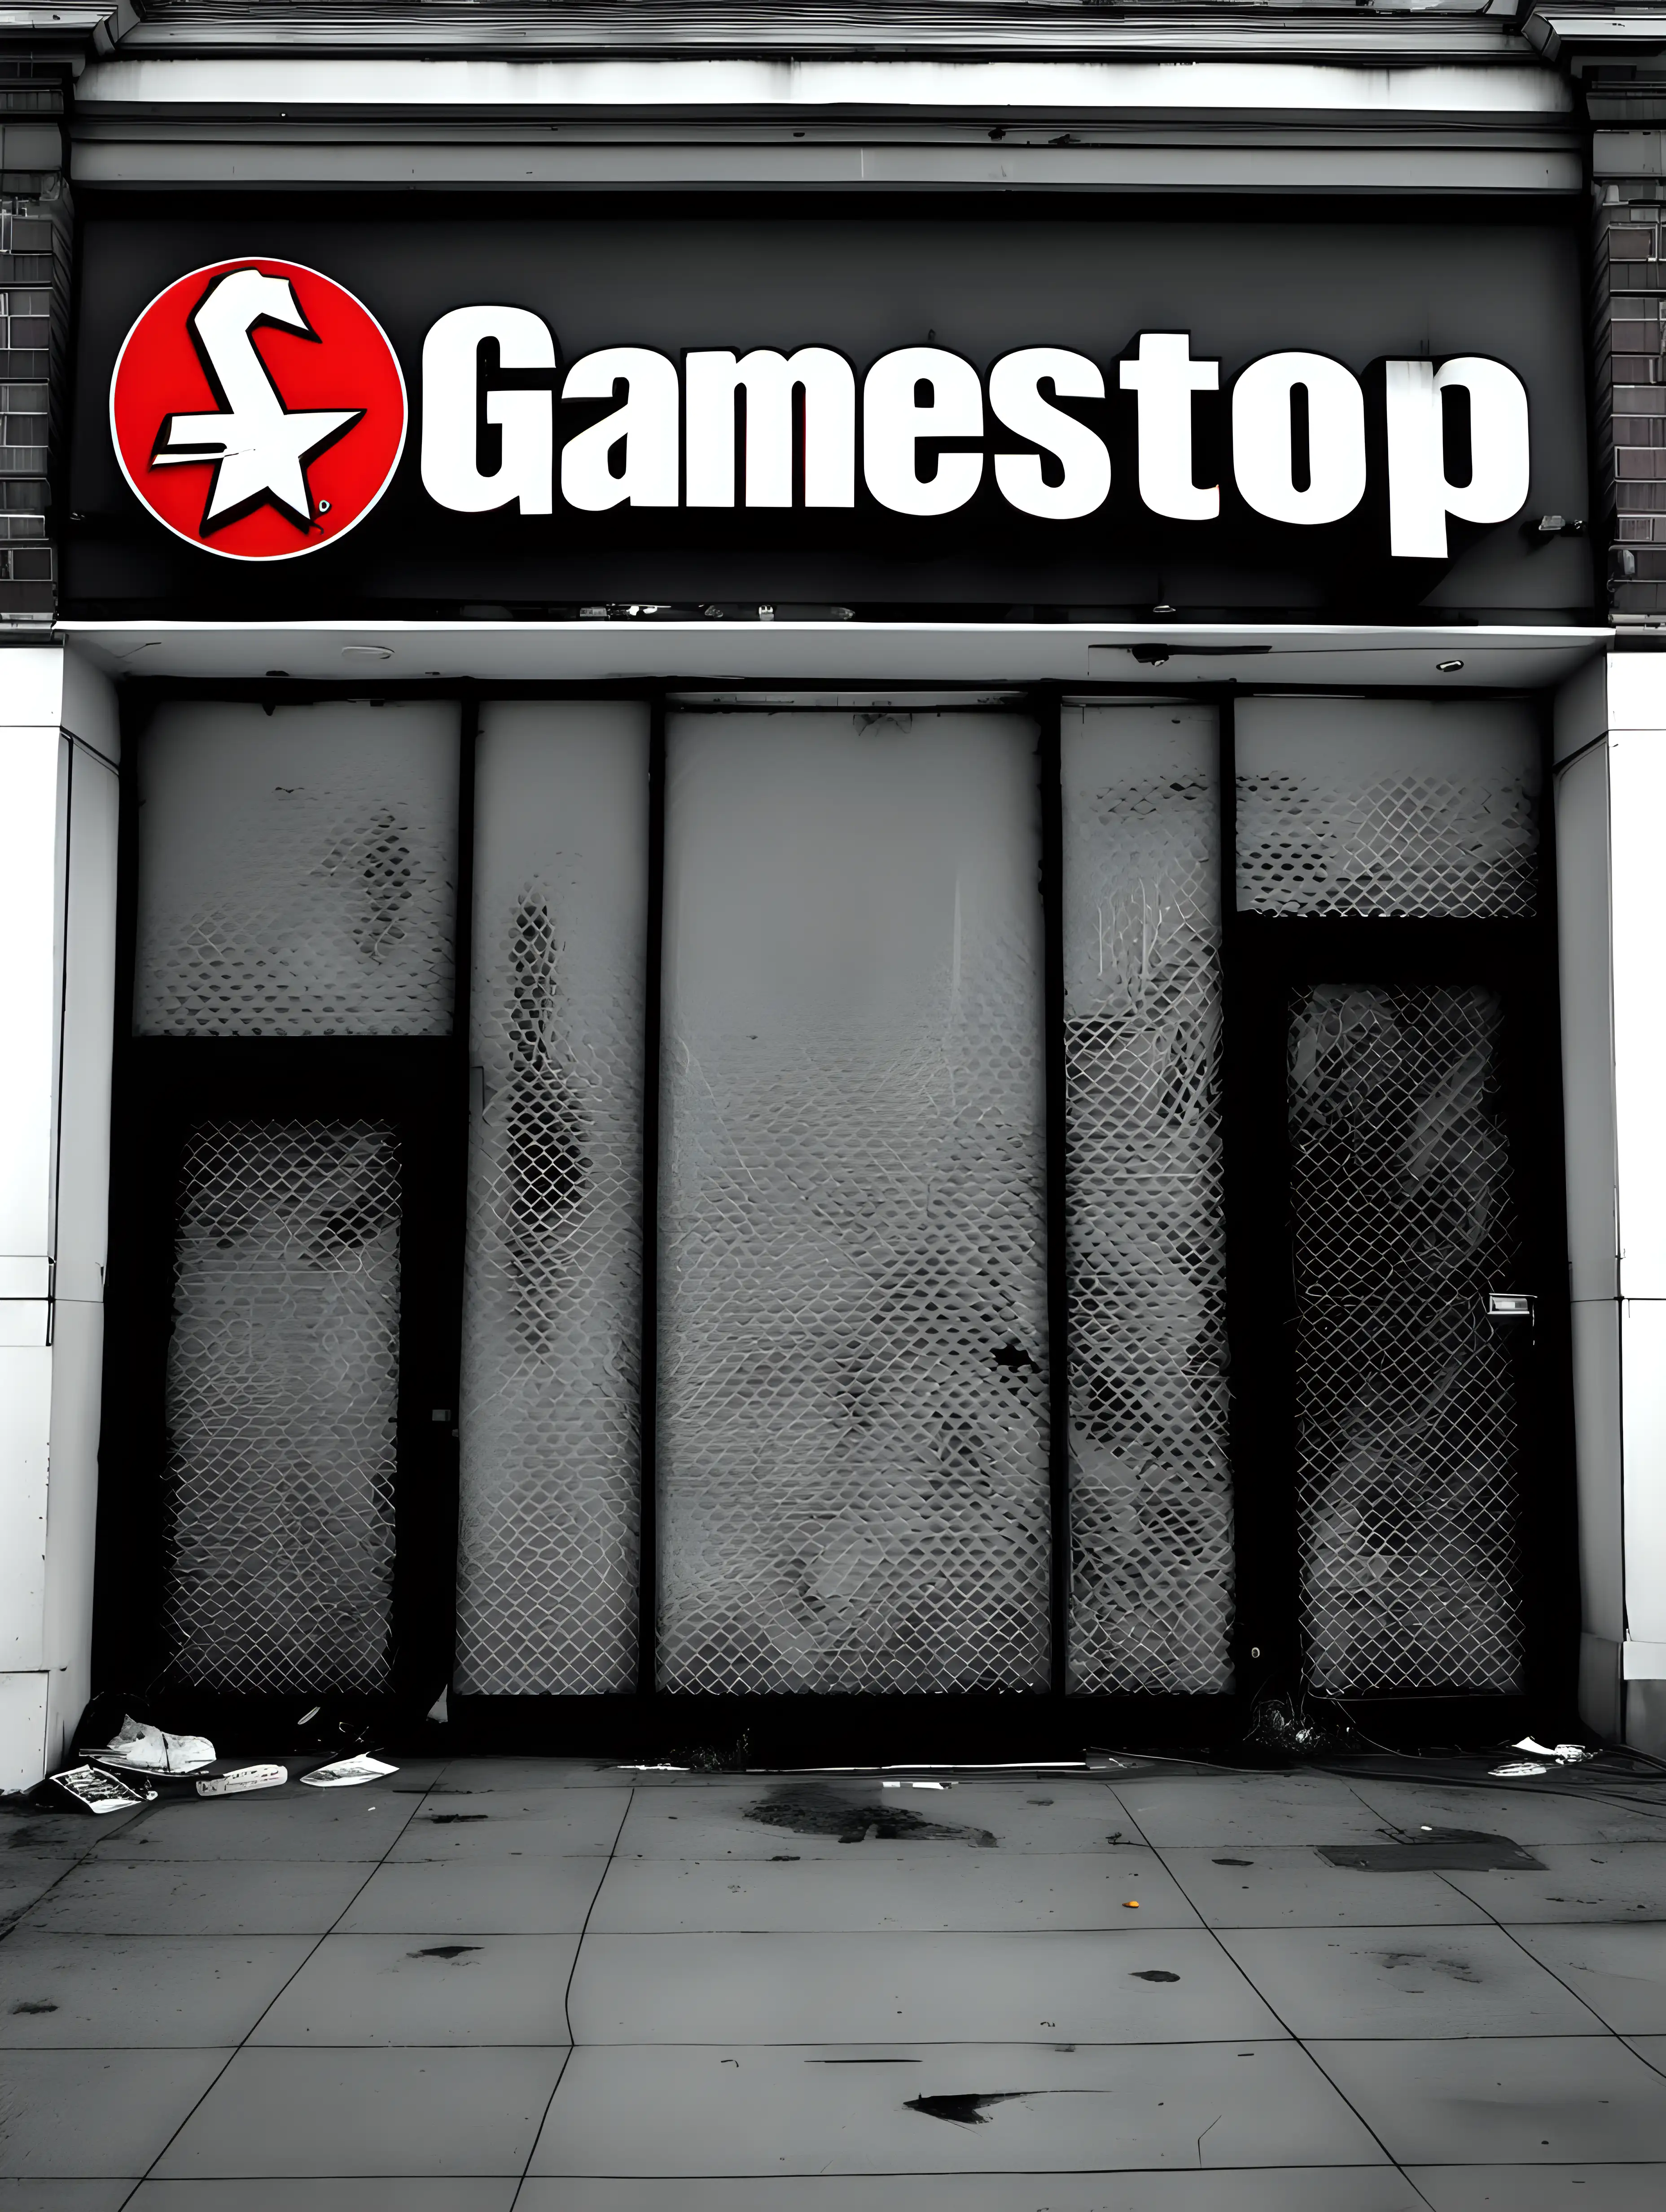 abandoned shop front with Gamestop logo